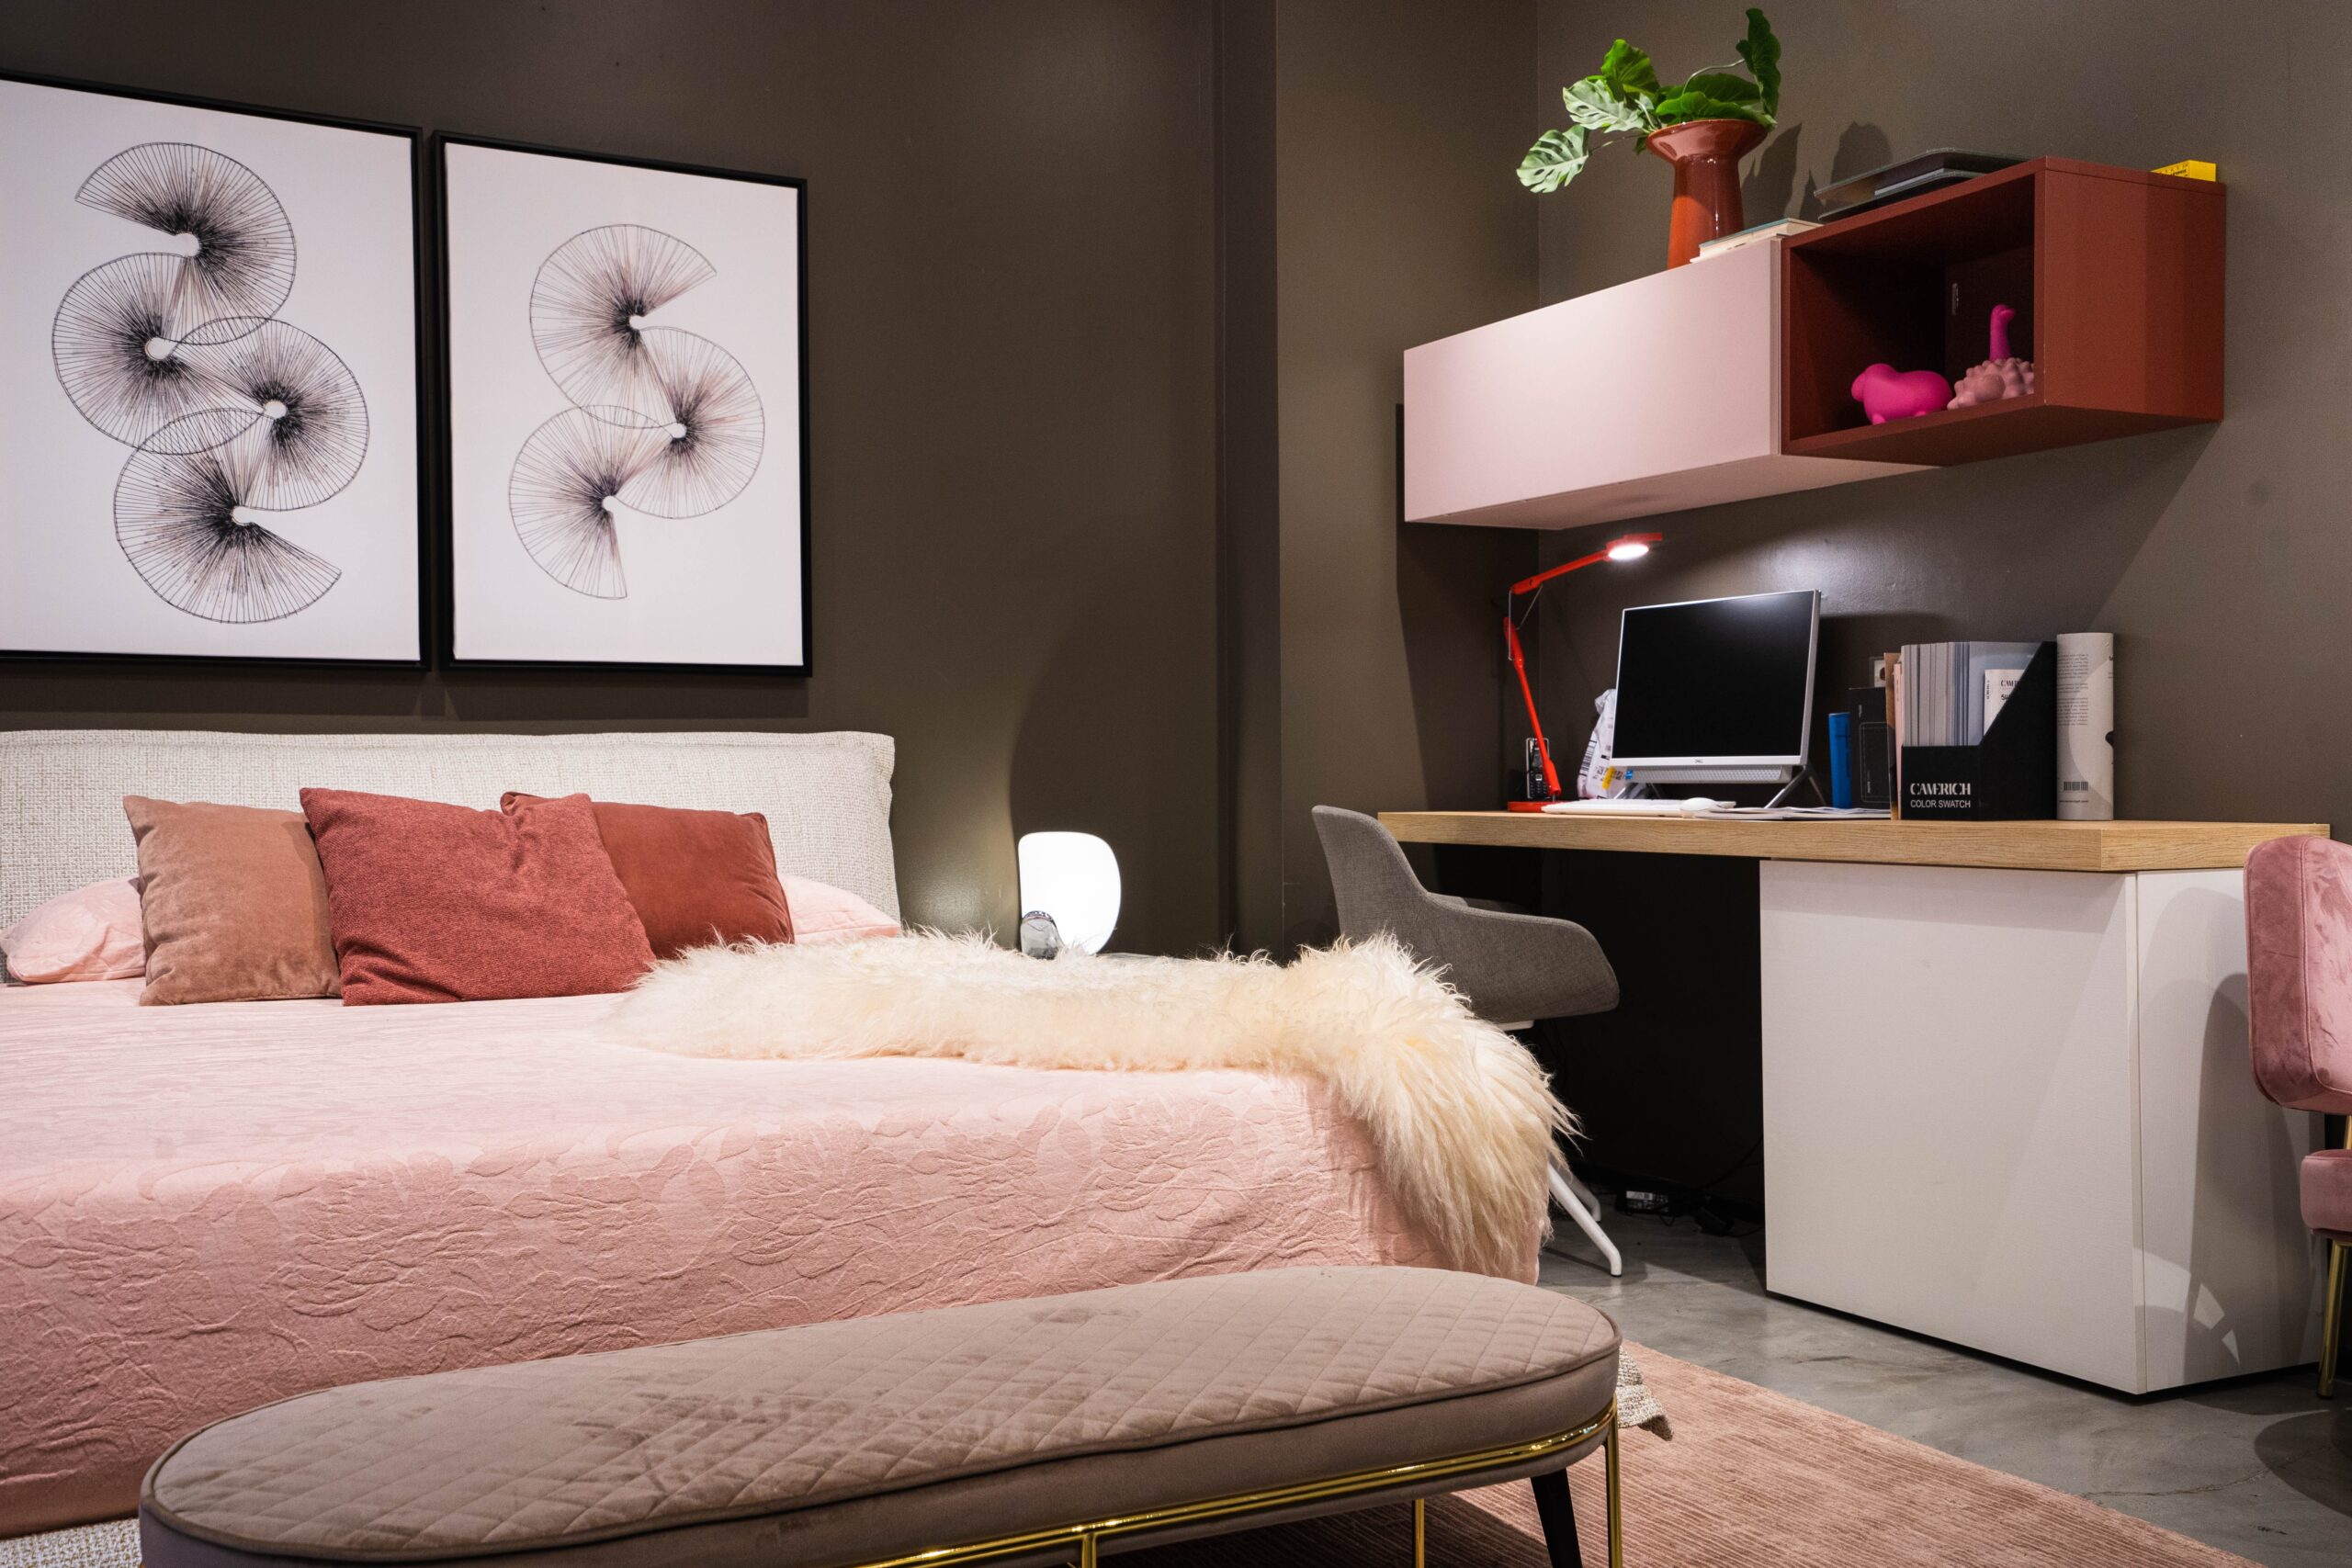 Add a pop of color to your boho bedroom with paint, decor or bedding. Pictured: A pink boho bedroom.